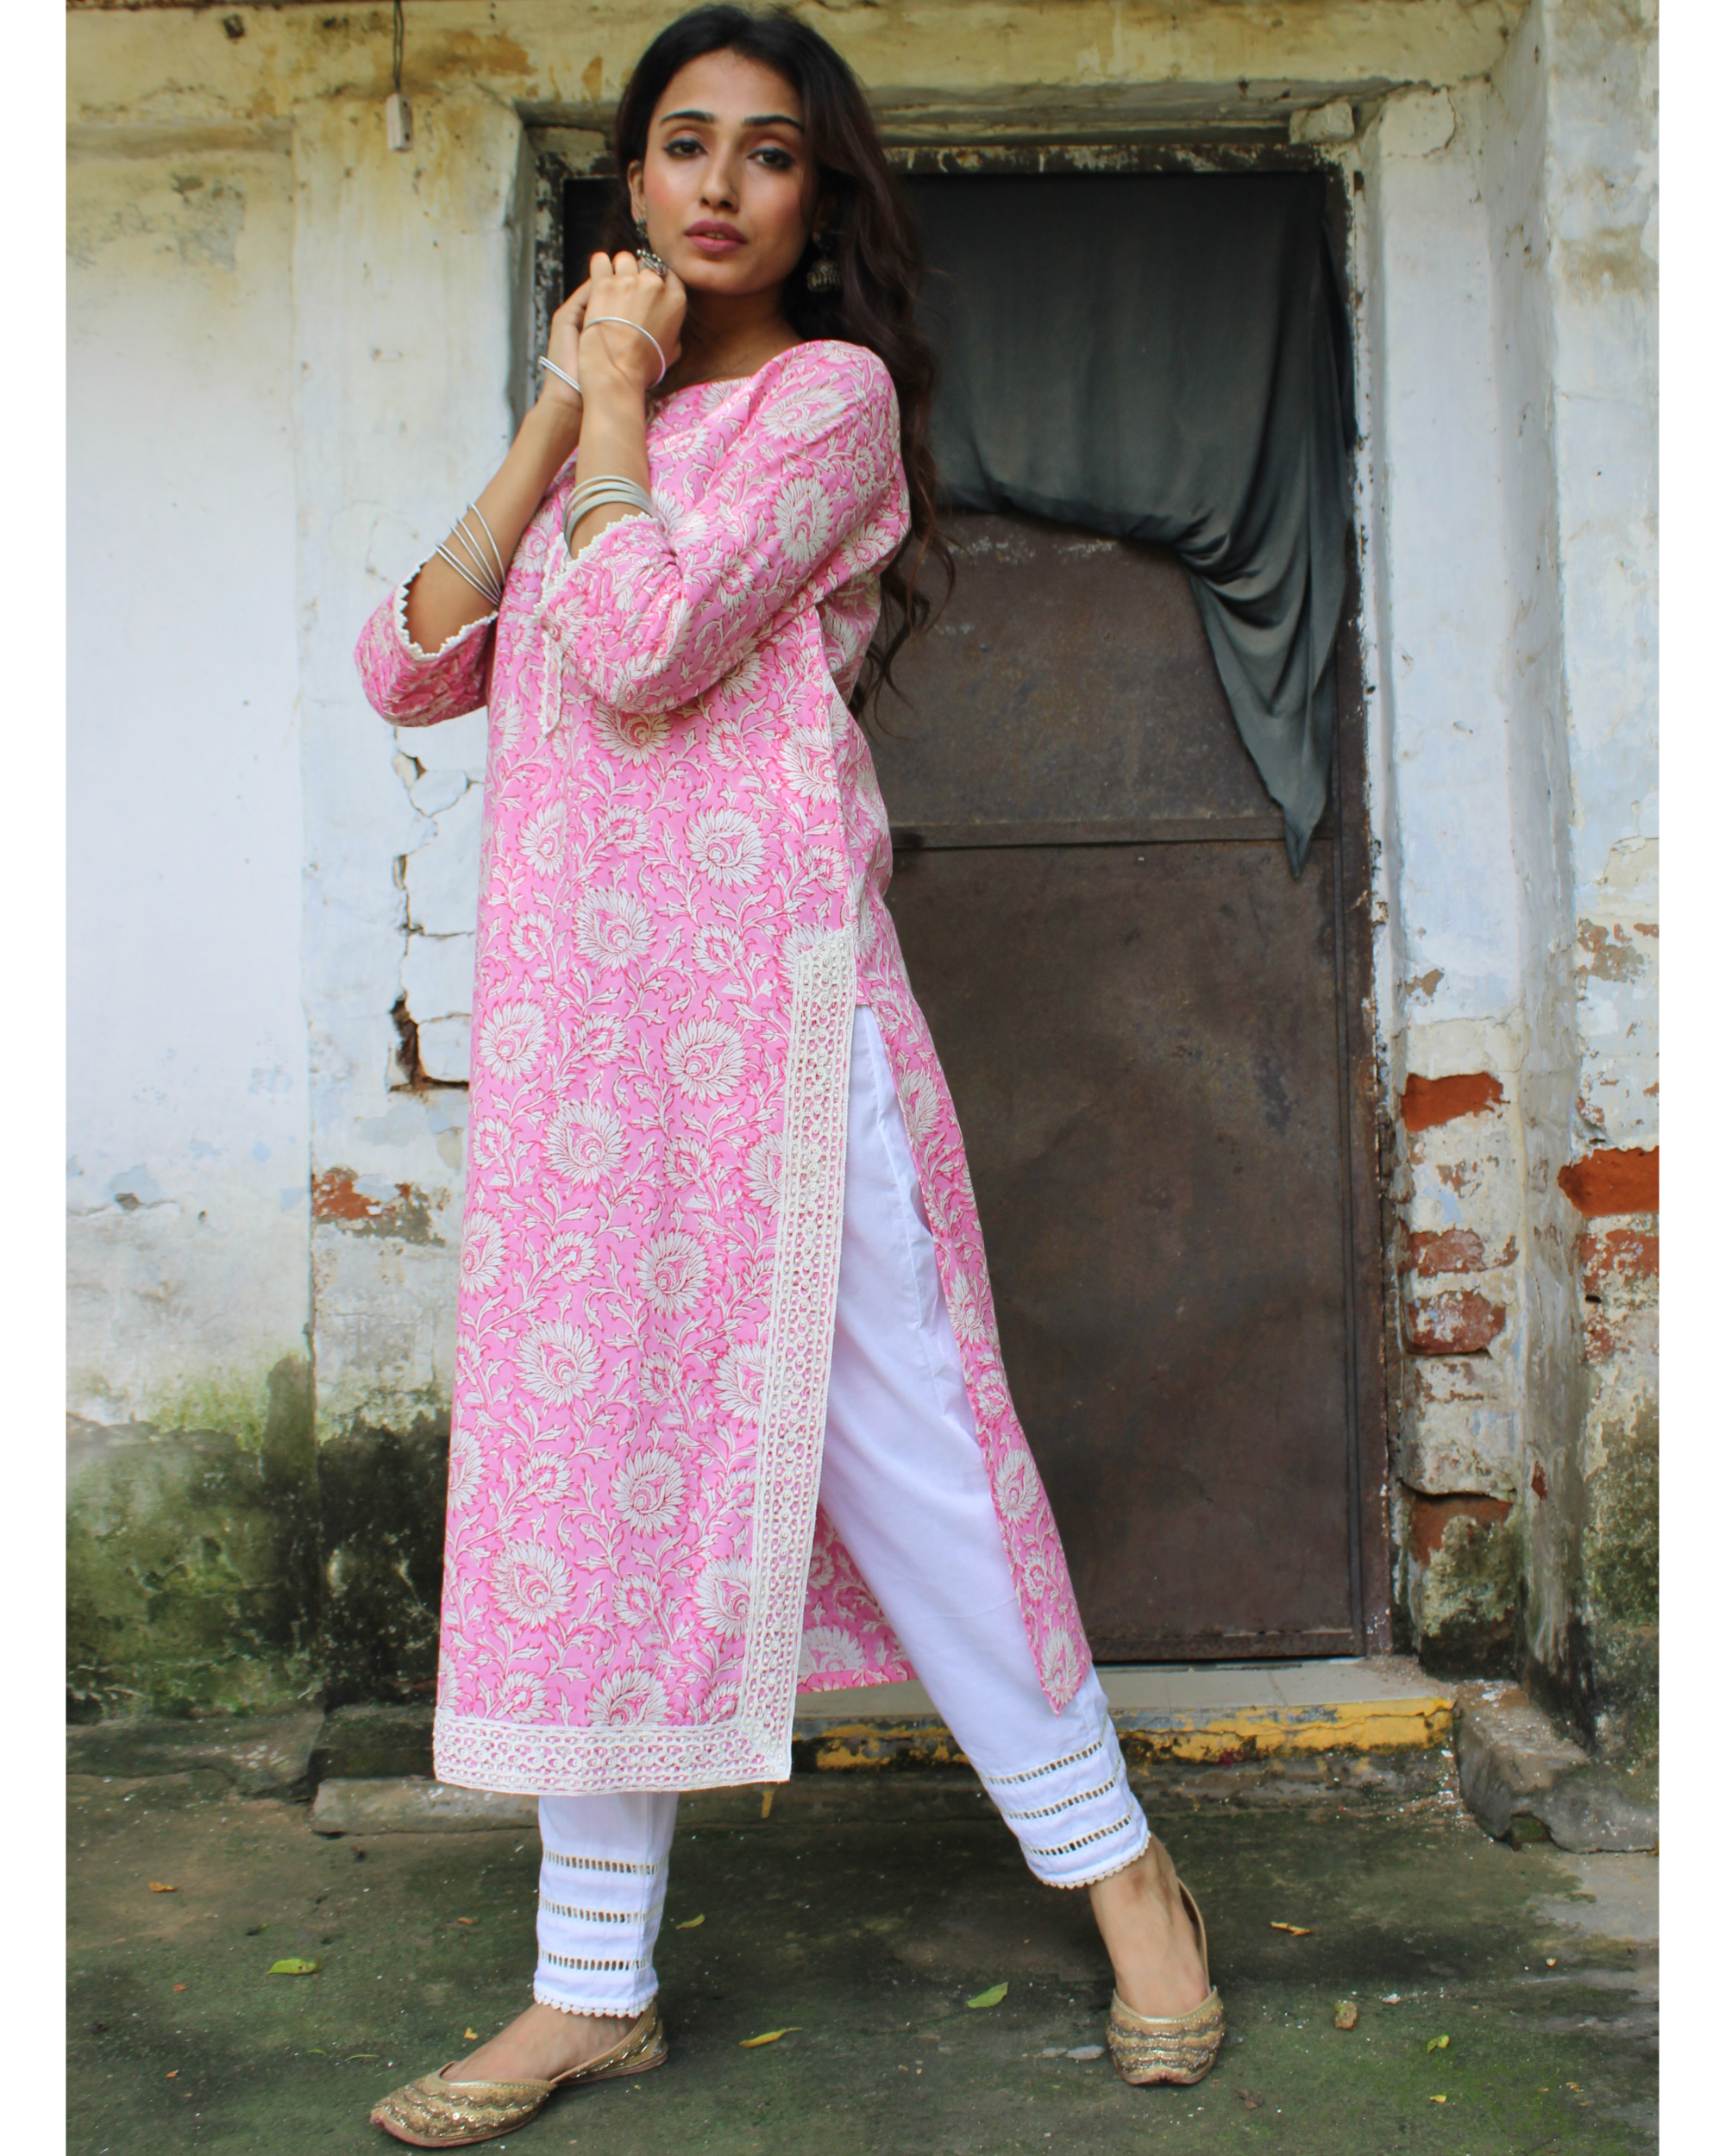 White cotton pants with lace detailing by Jalpa Shah